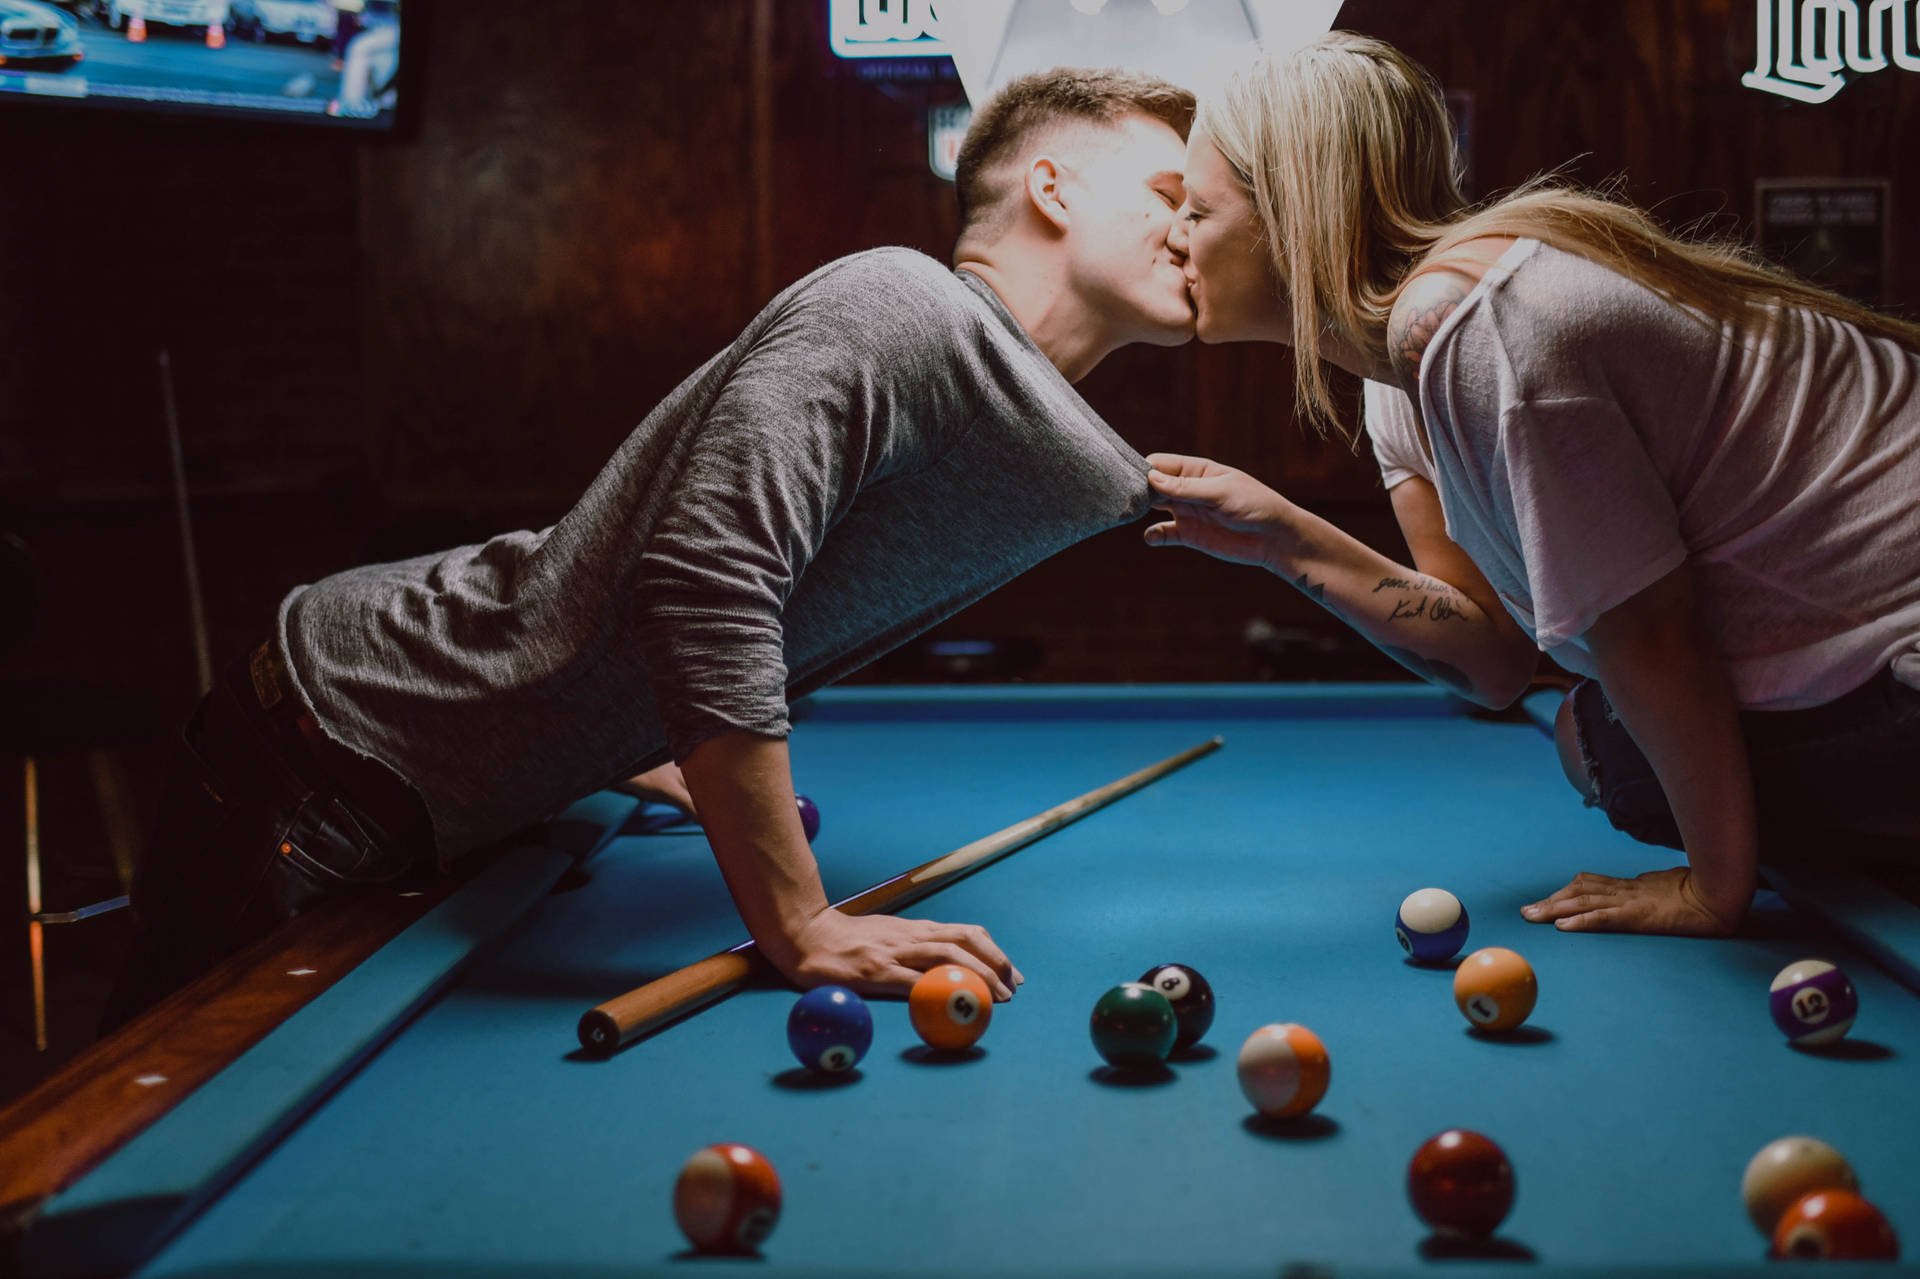 Couple Kissing On Billiard Table Background